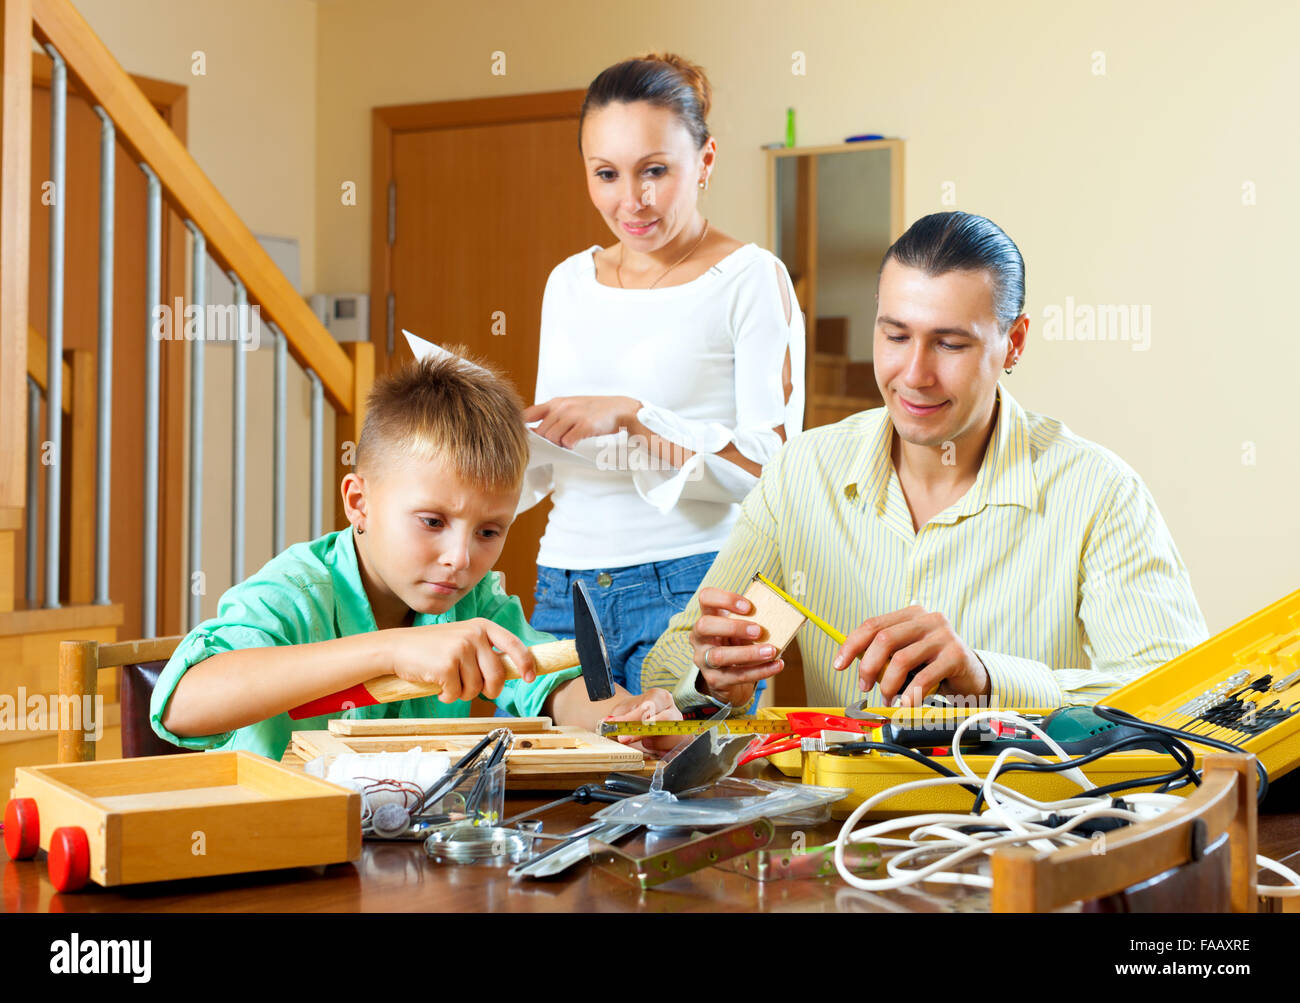 Nice family together doing something with working tools at home Stock Photo